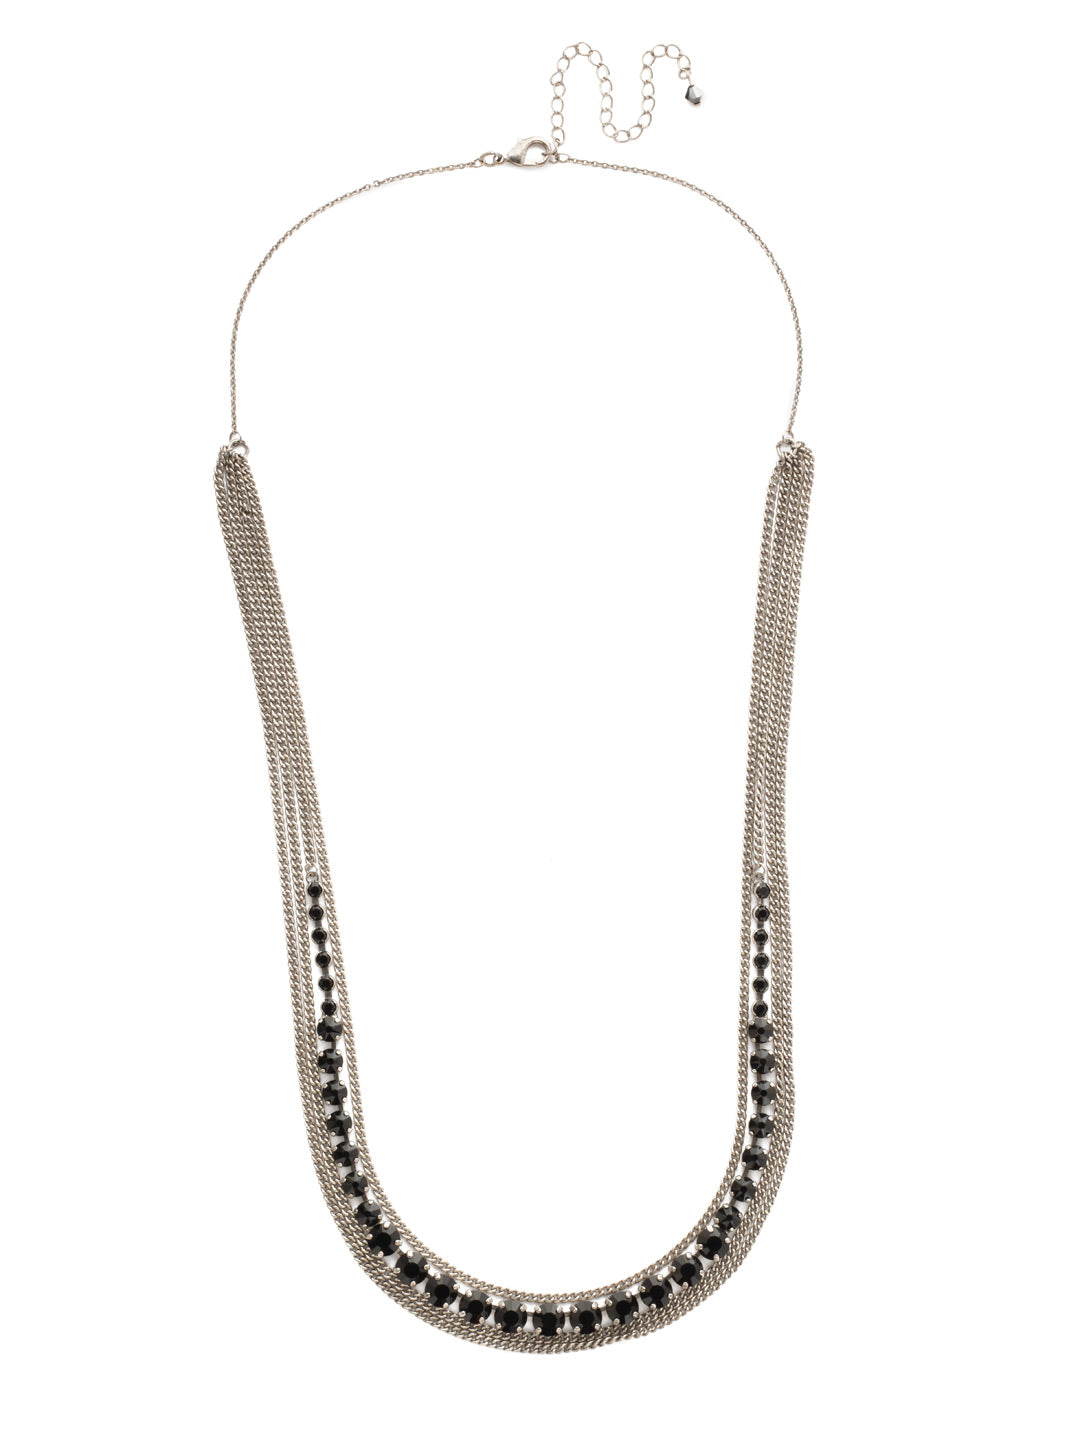 Layer It On Multi-Strand Layered Necklace - NCR73ASBON - <p>Styled for you. Rows of mixed metal chain and crystal intertwine in this quintessential long layered necklace! From Sorrelli's Black Onyx collection in our Antique Silver-tone finish.</p>